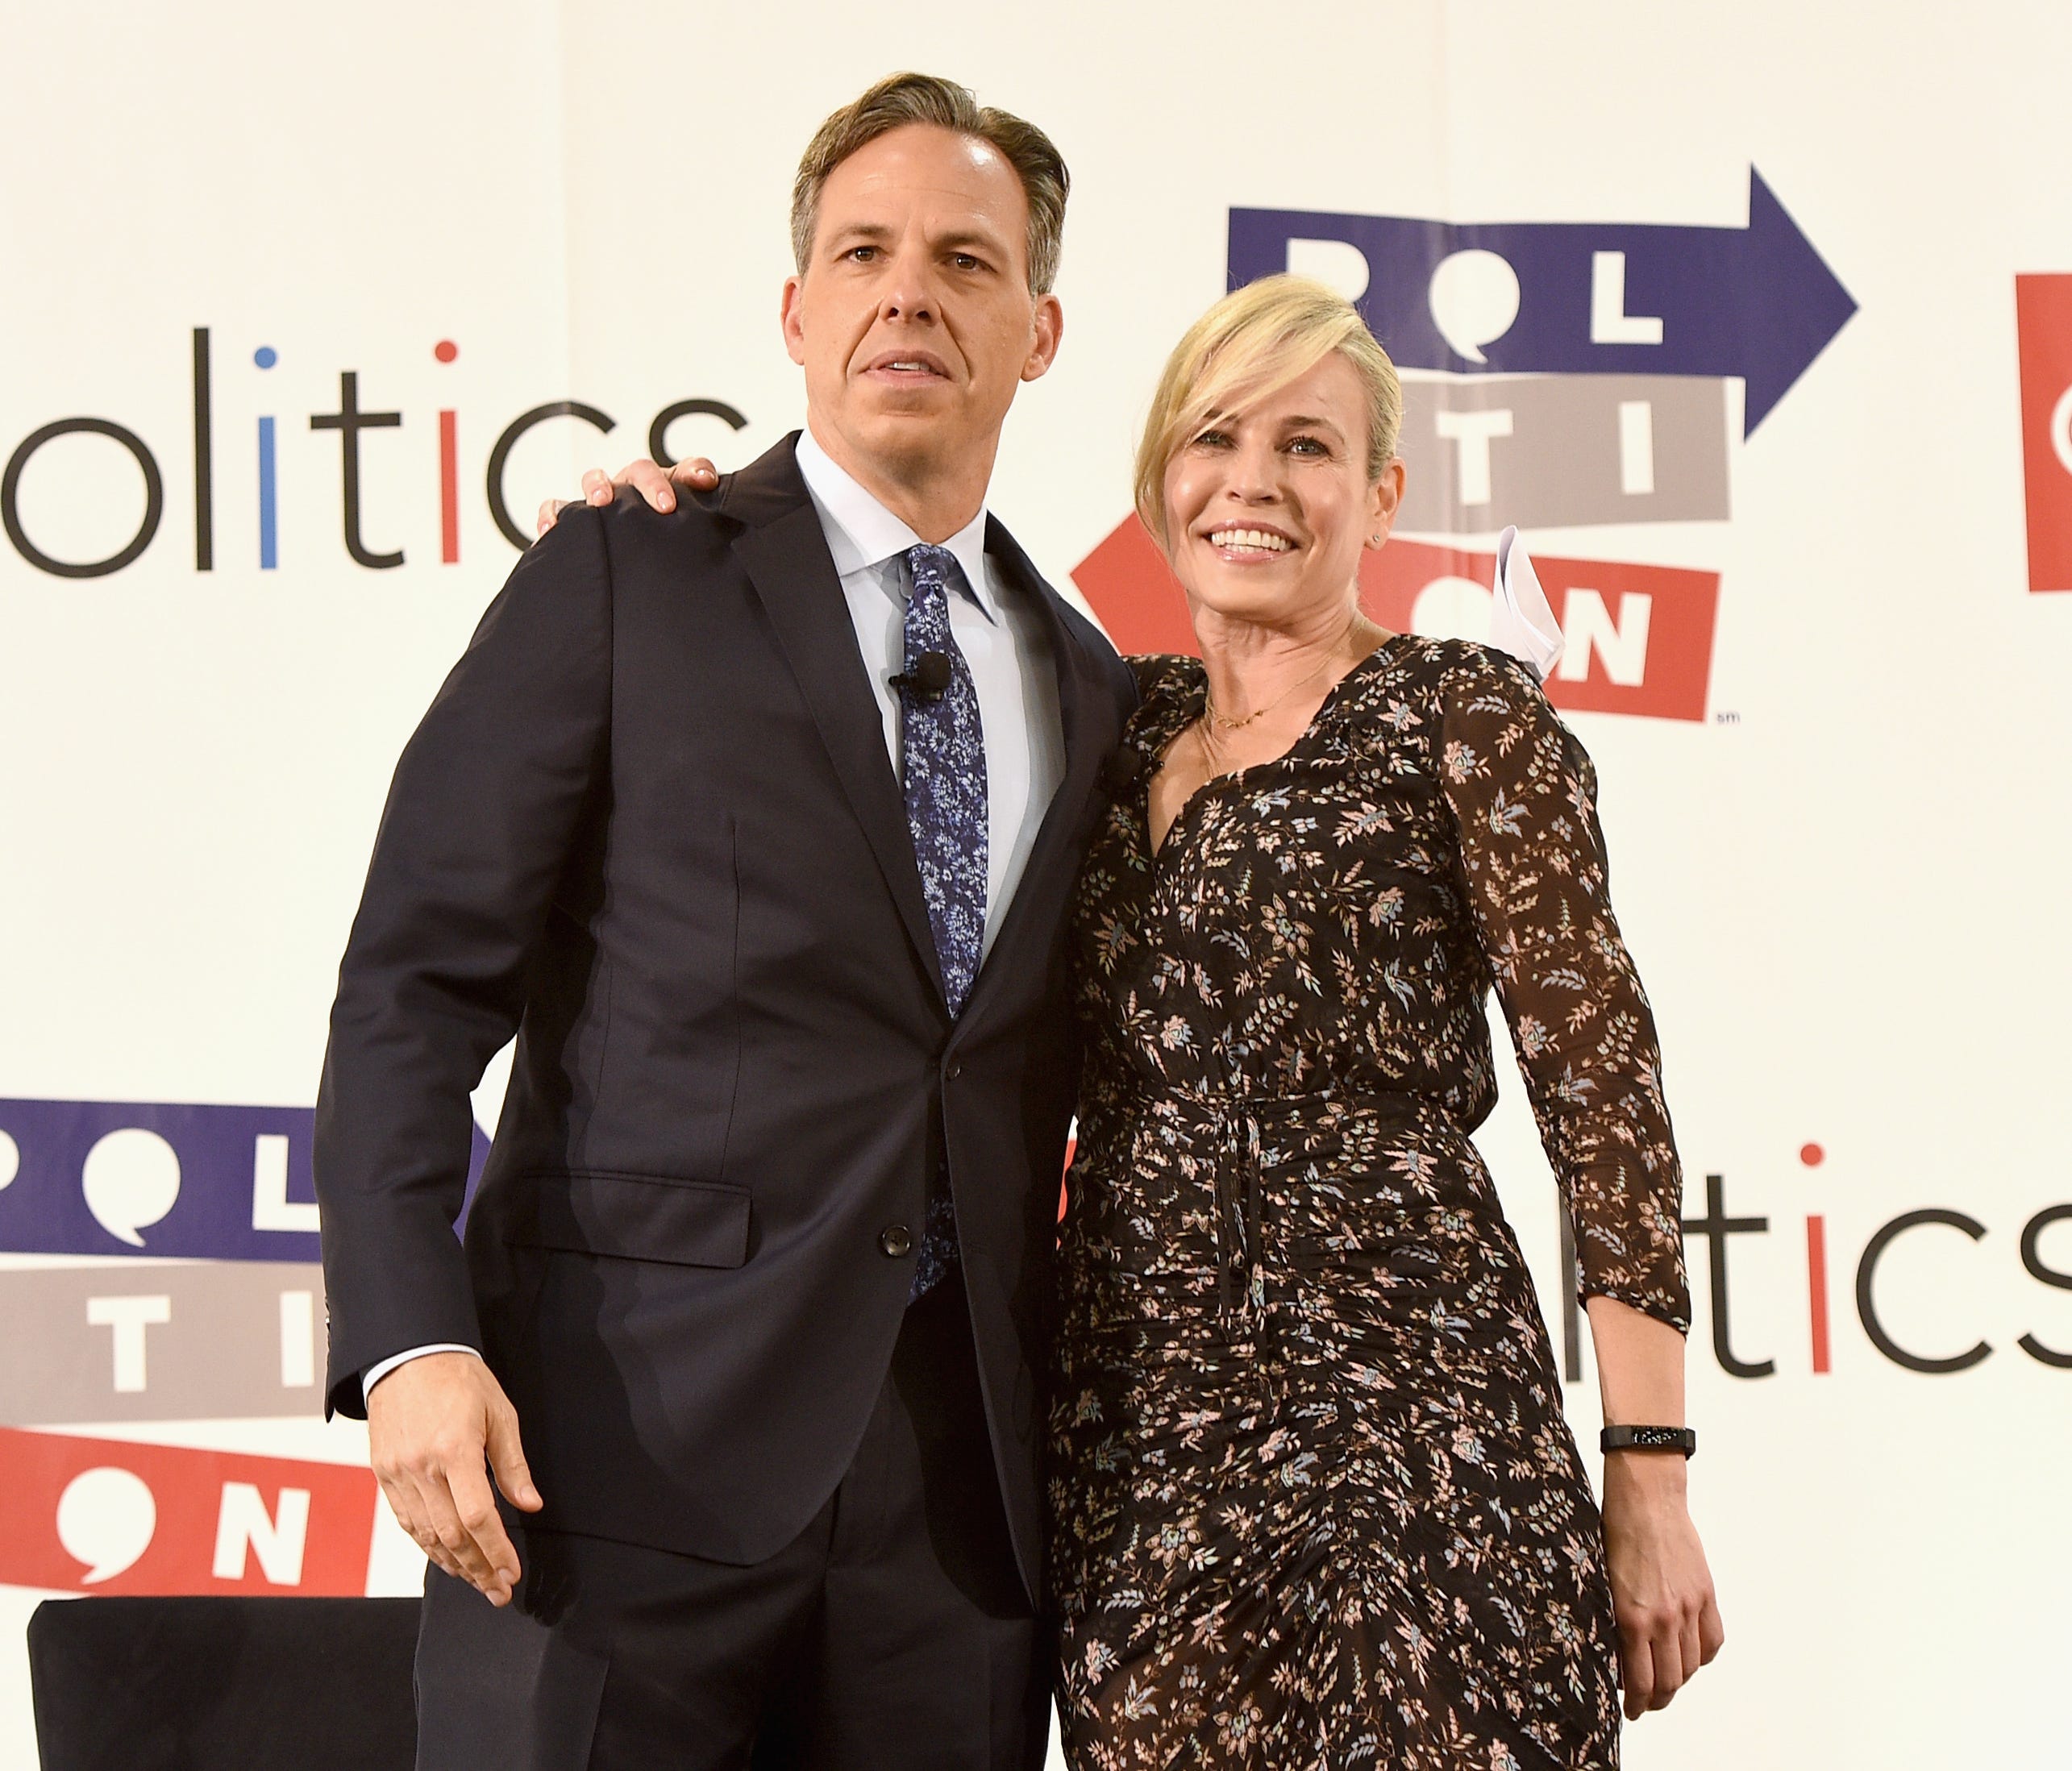 CNN's Jake Tapper is pictured during a Politicon event earlier this year.